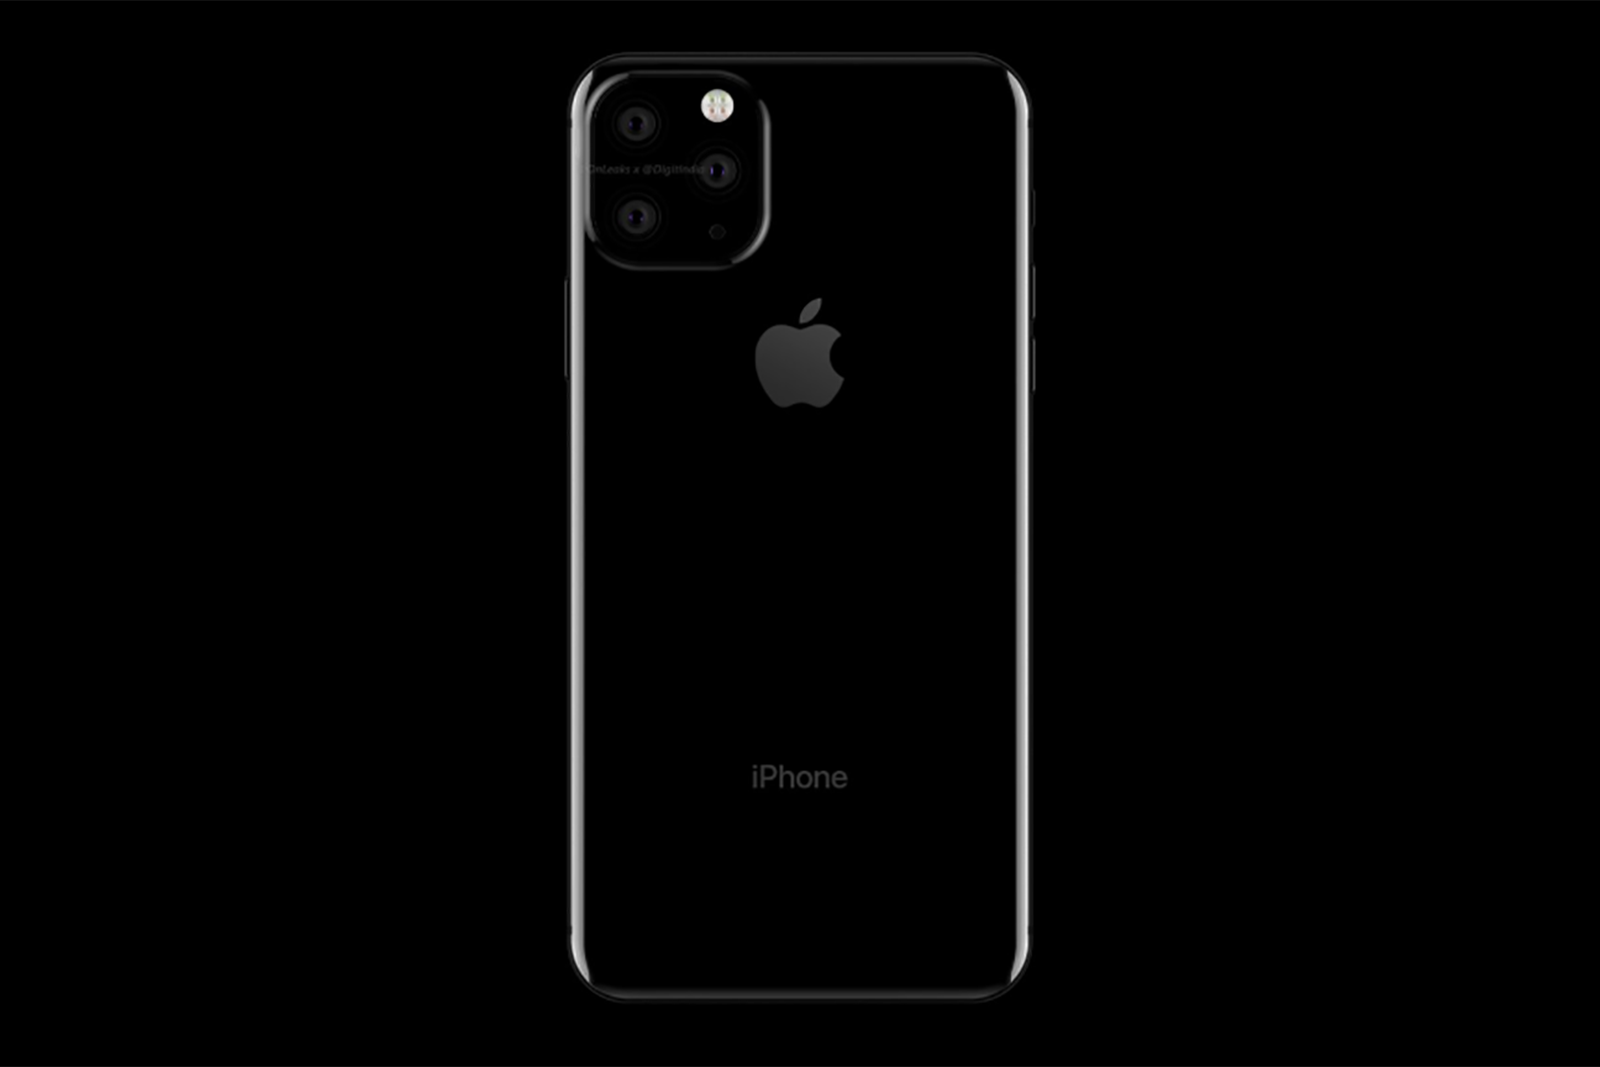 Apples 2019 iPhone will have inconspicuous triple-lens camera with black coating image 1